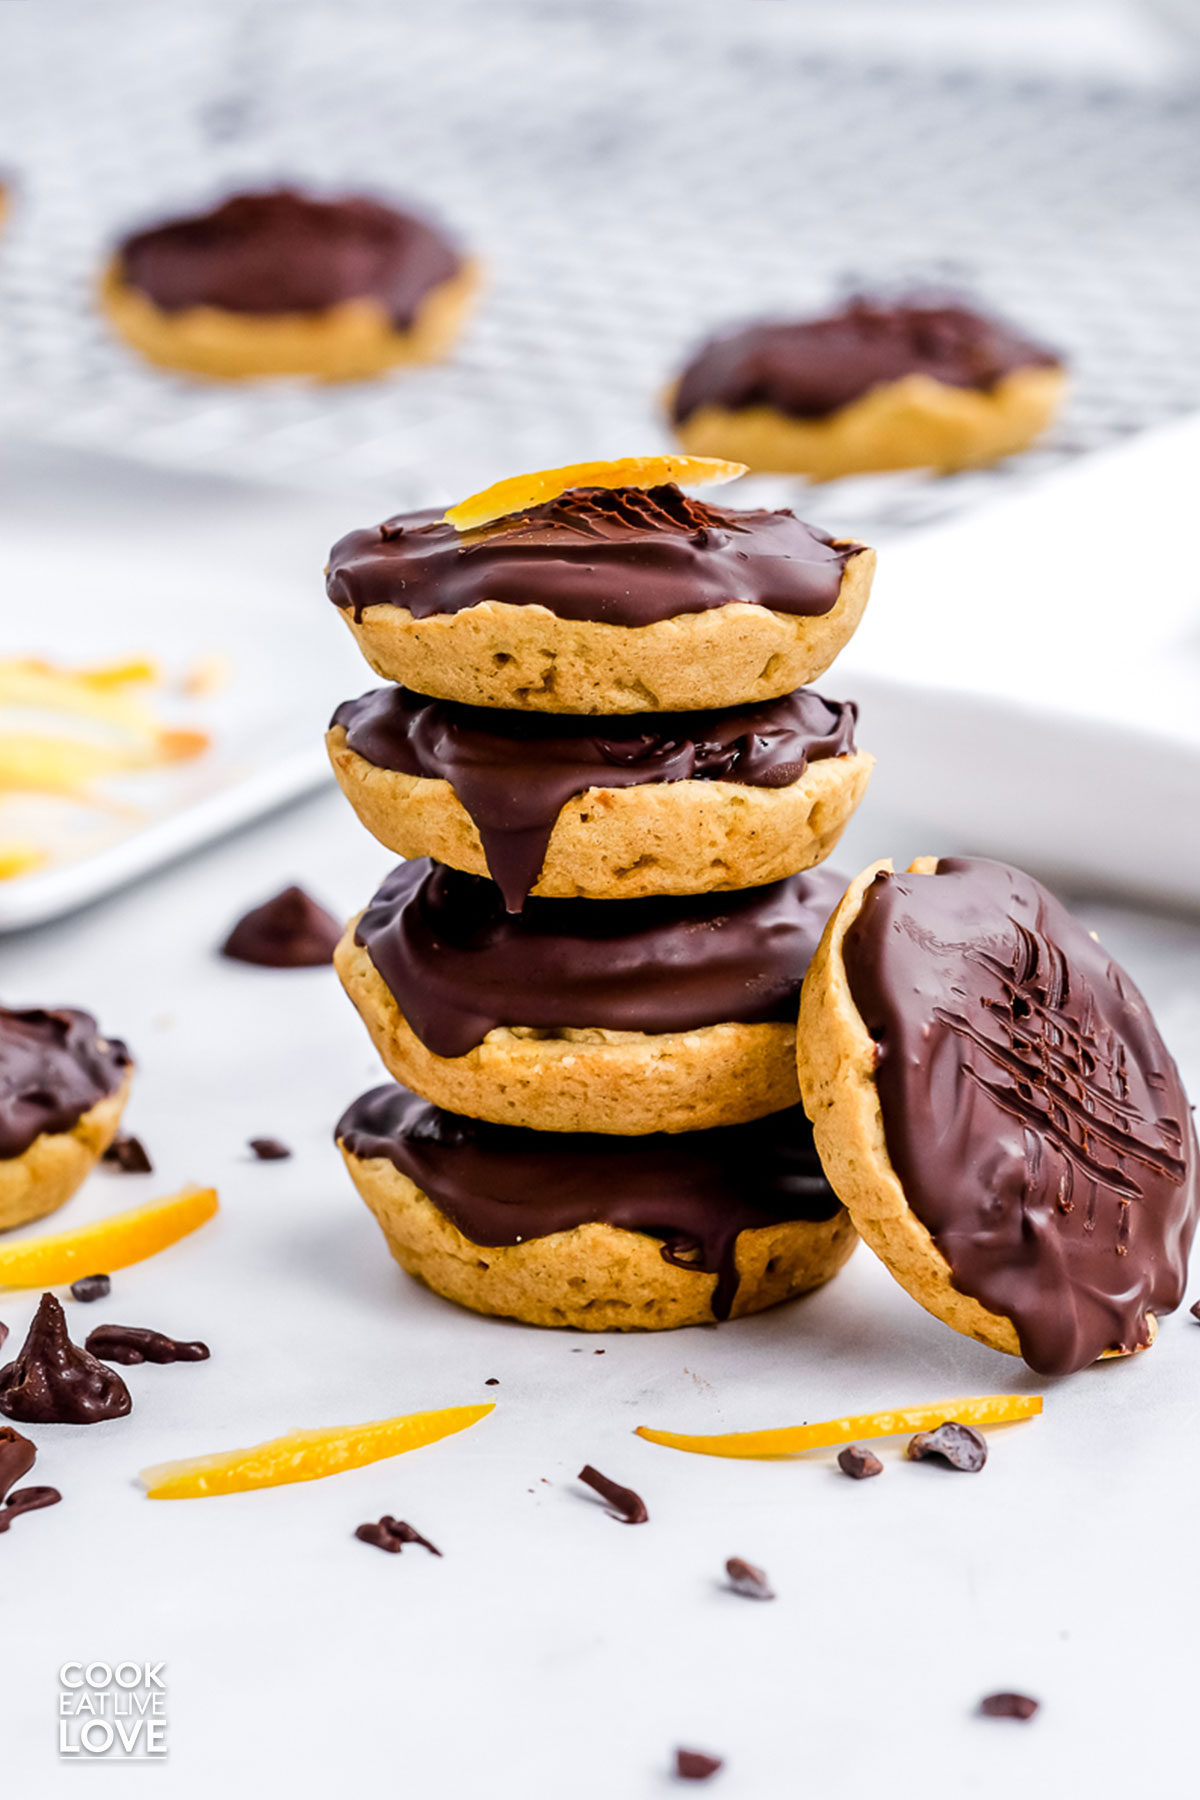 Four jaffa cakes stacked on top of each other and one at an angle propped on the stack.